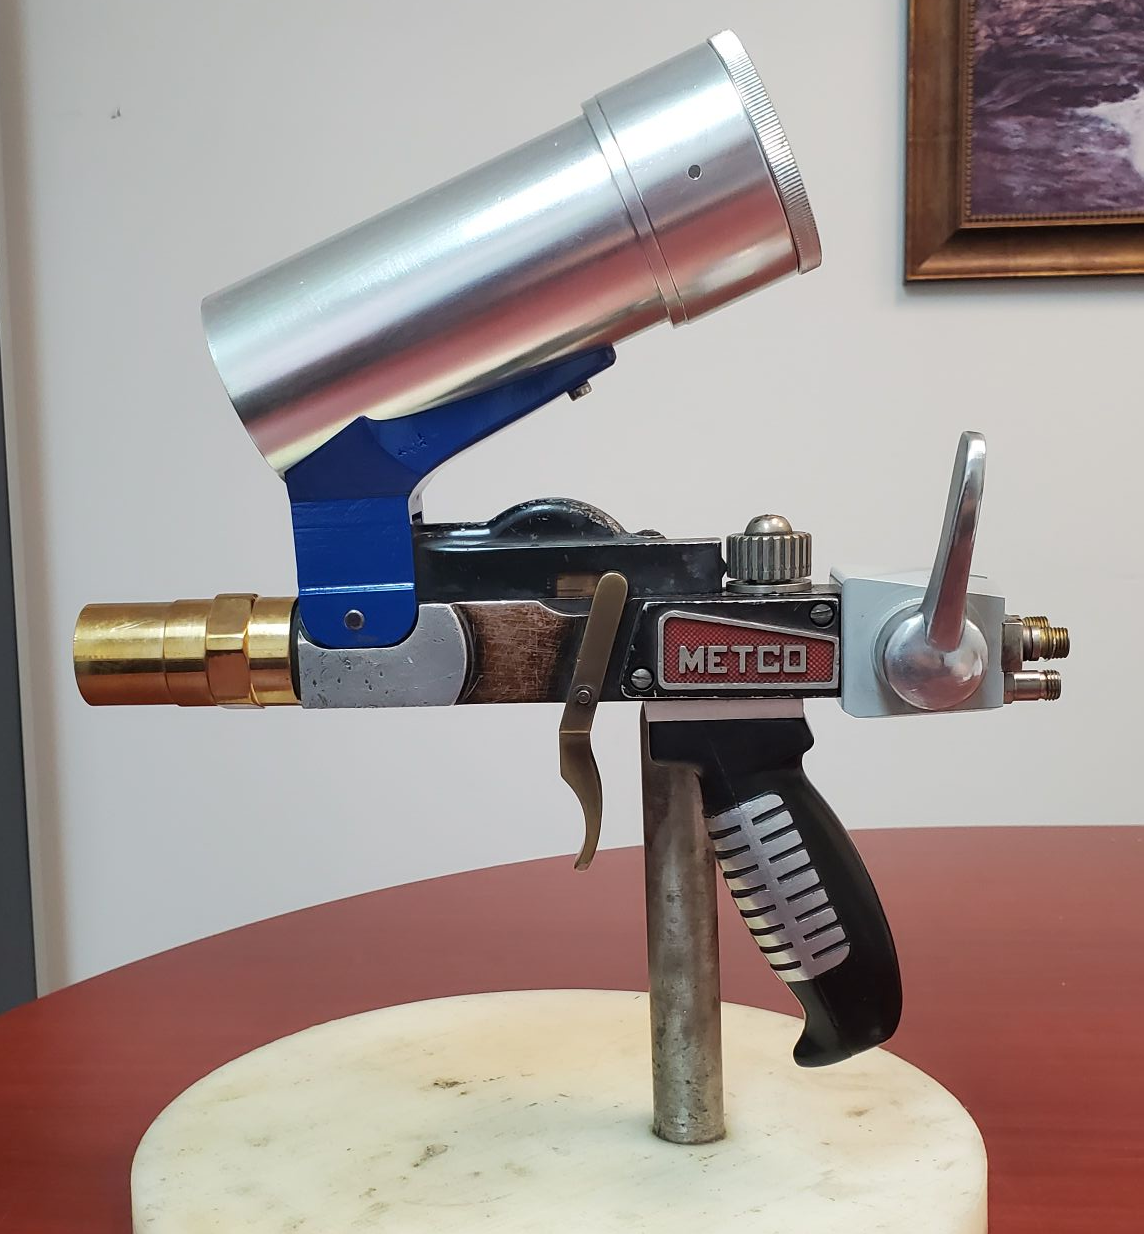 https://plasmapowders.com/media/used-metco-5p-torch-for-sale.png